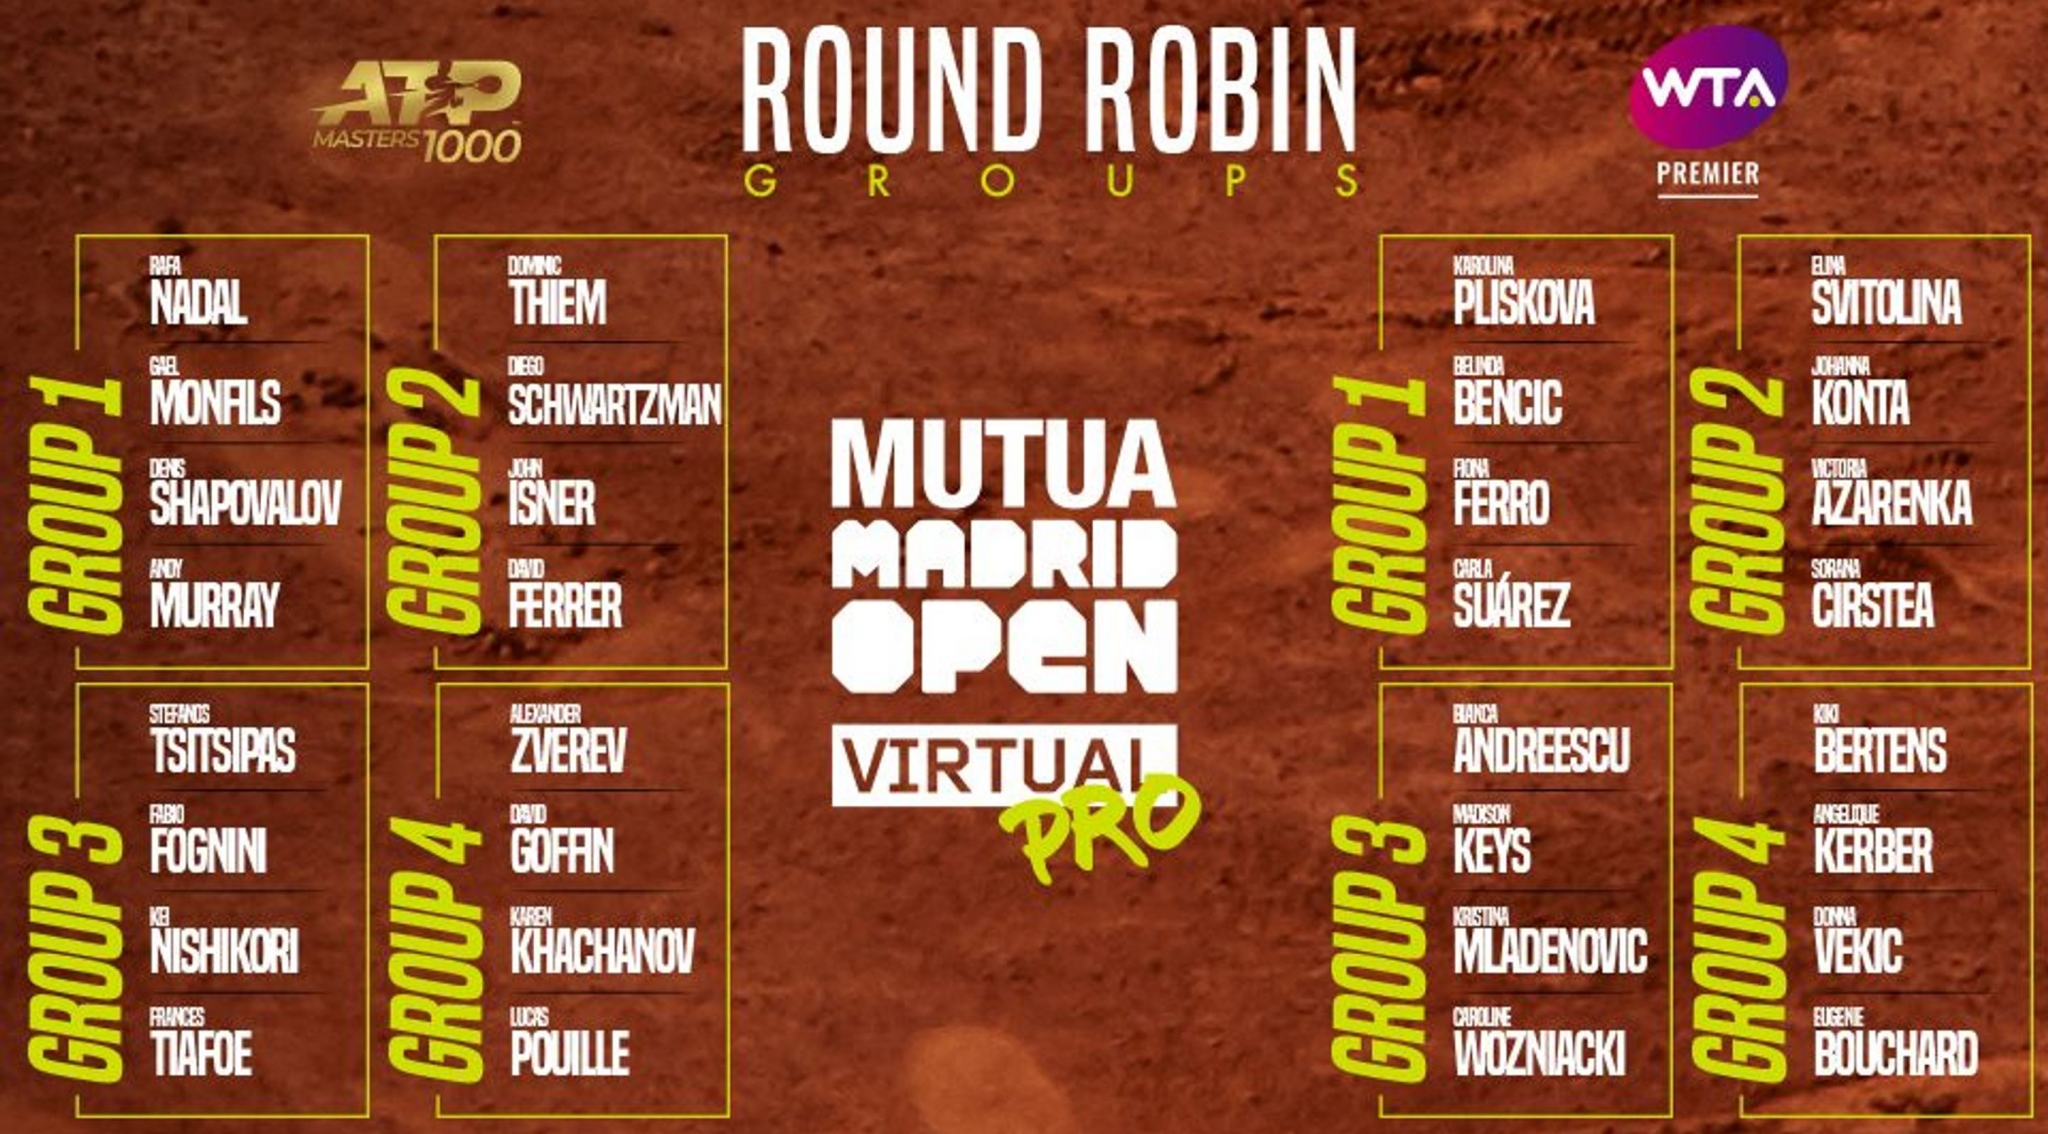 Nadal and Murray among players set to compete in virtual Mutua Madrid Open